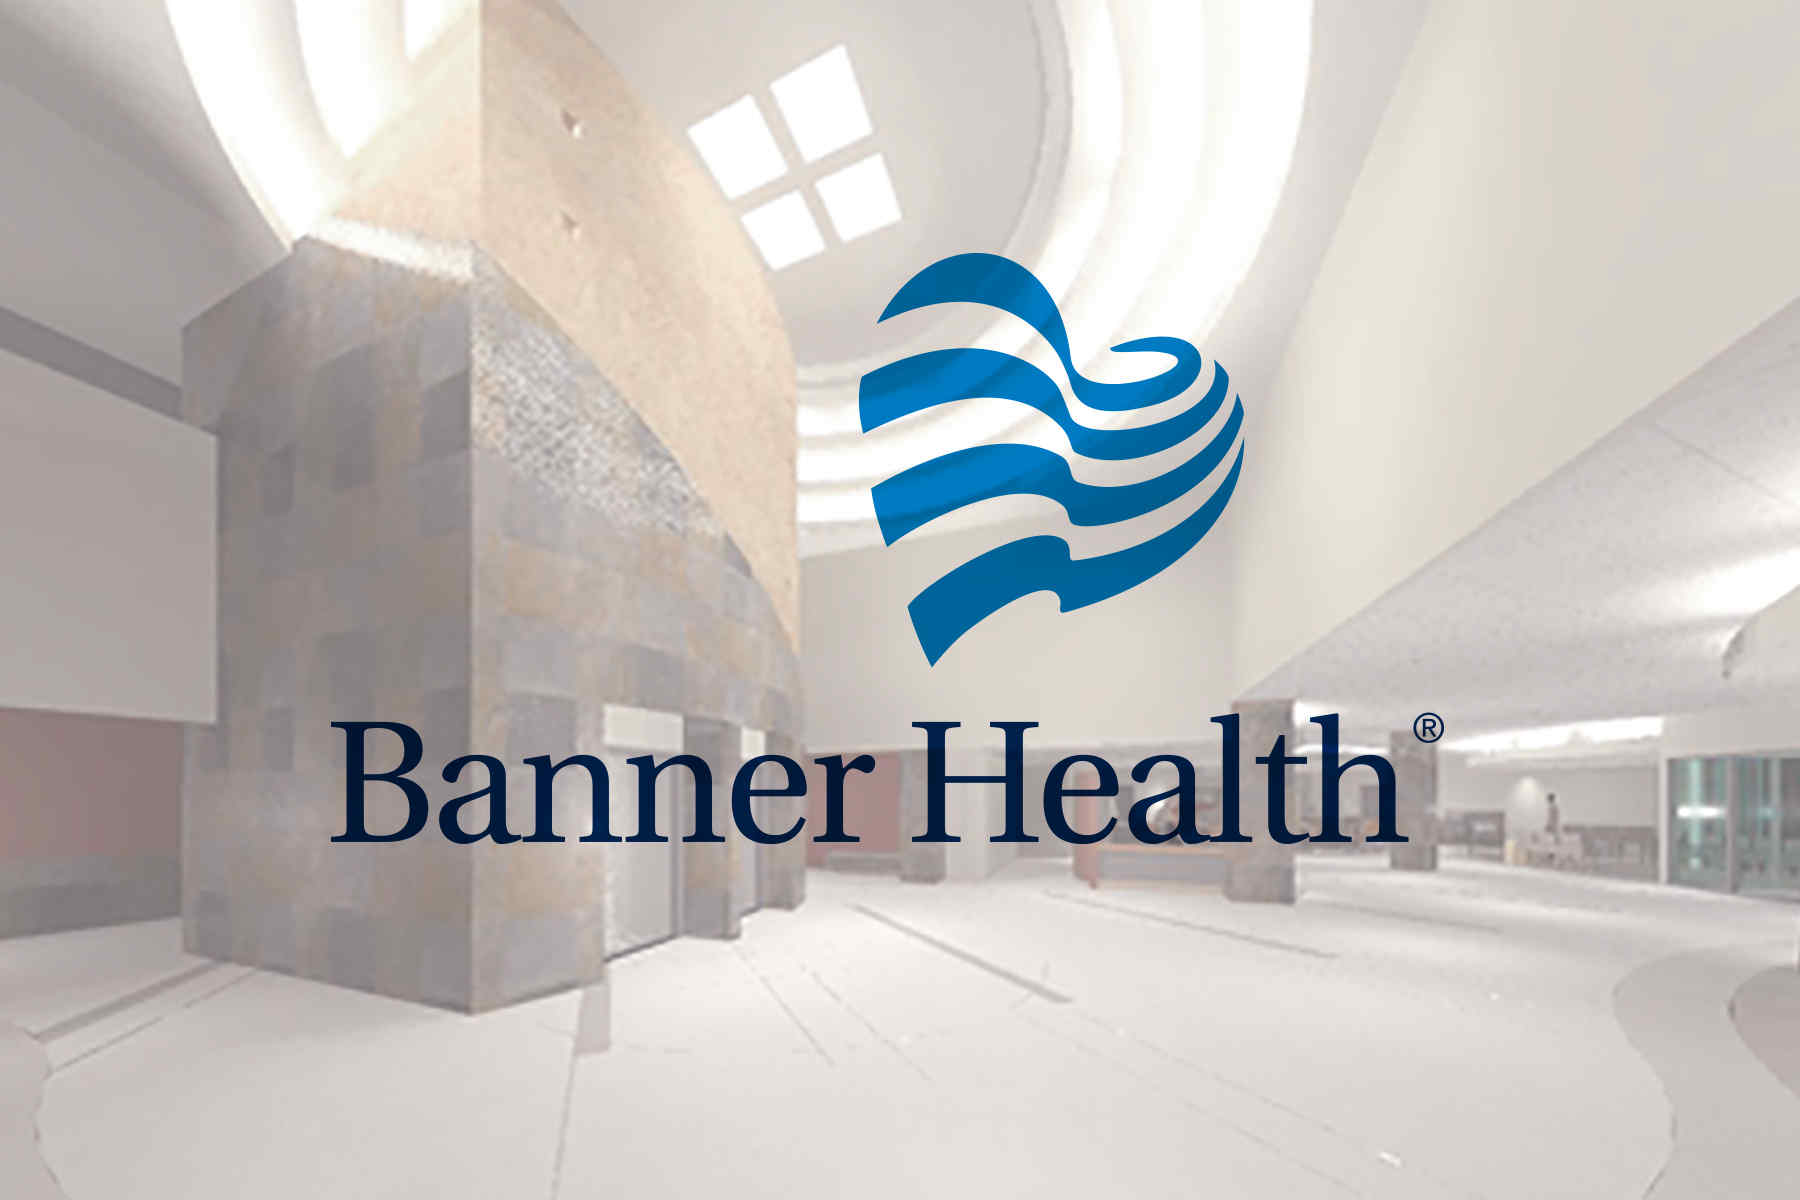 Banner Health Launches Digital Health Program with Xealth & Babyscripts